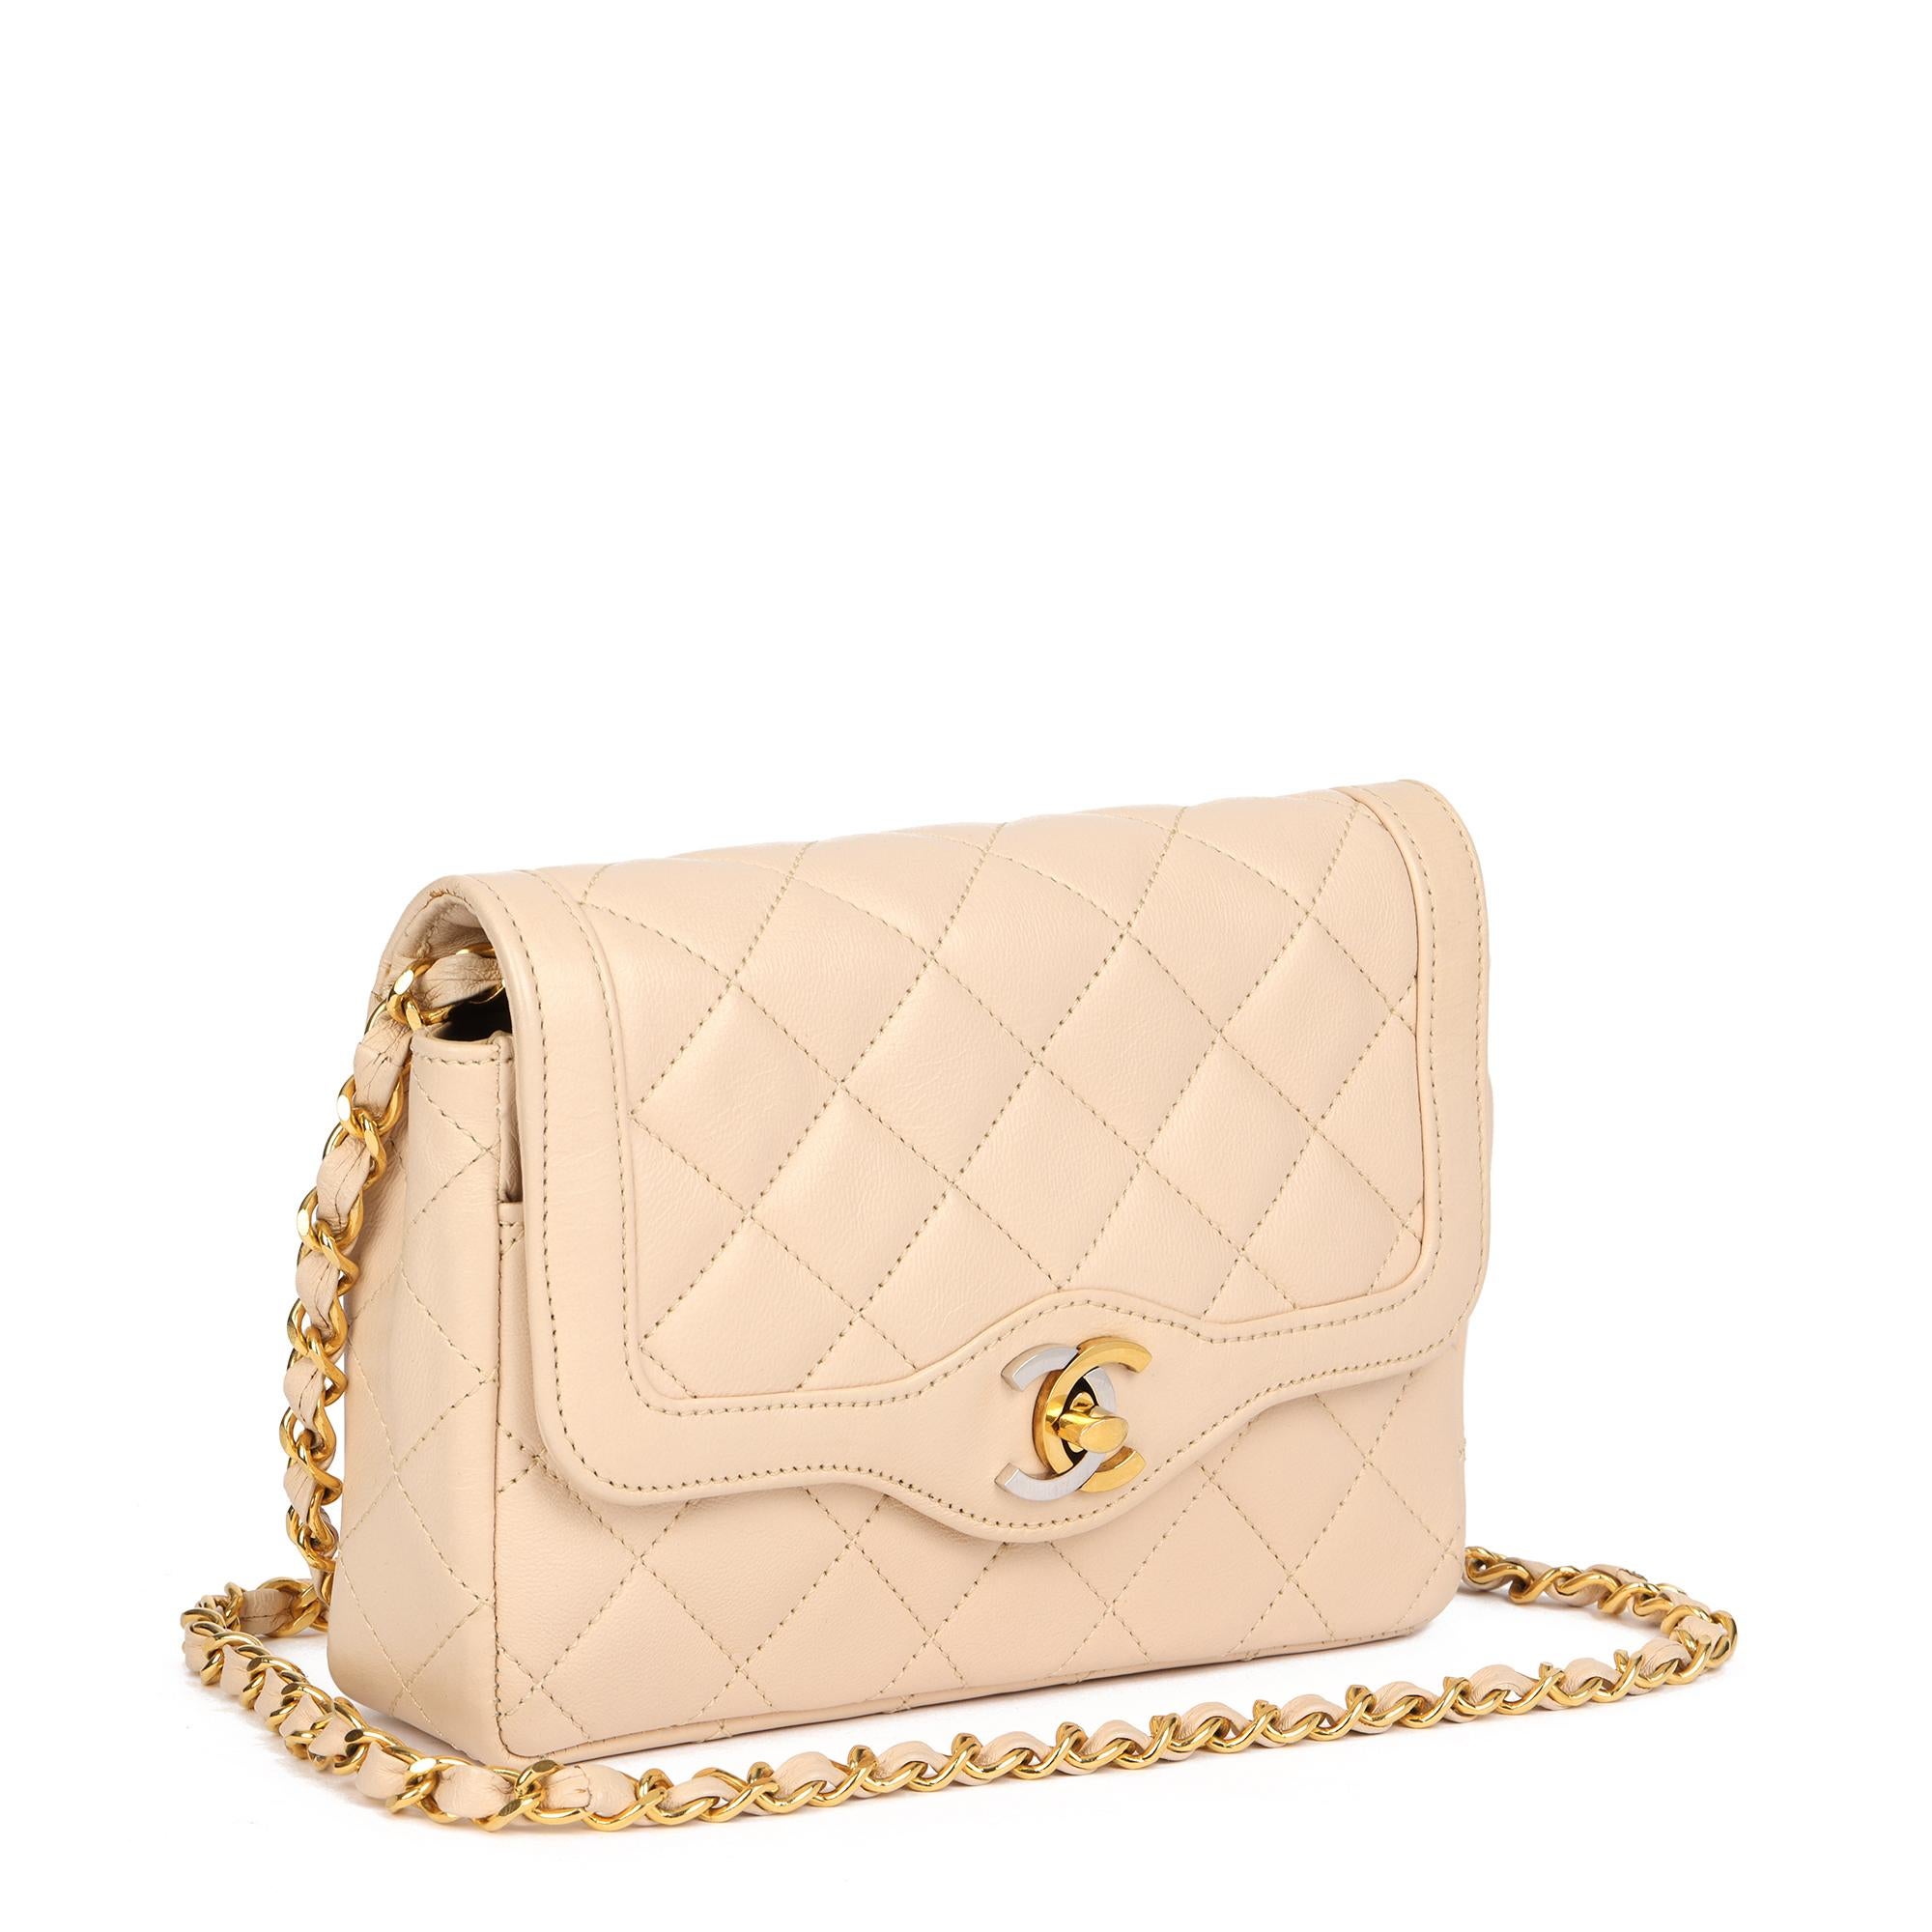 CHANEL
Light Beige Quilted Lambskin Vintage Paris-Limited Mini Flap Bag

Xupes Reference: HB4721
Serial Number: 0186762
Age (Circa): 1986
Accompanied By: Authenticity Card
Authenticity Details: Authenticity Card, Serial Sticker (Made in